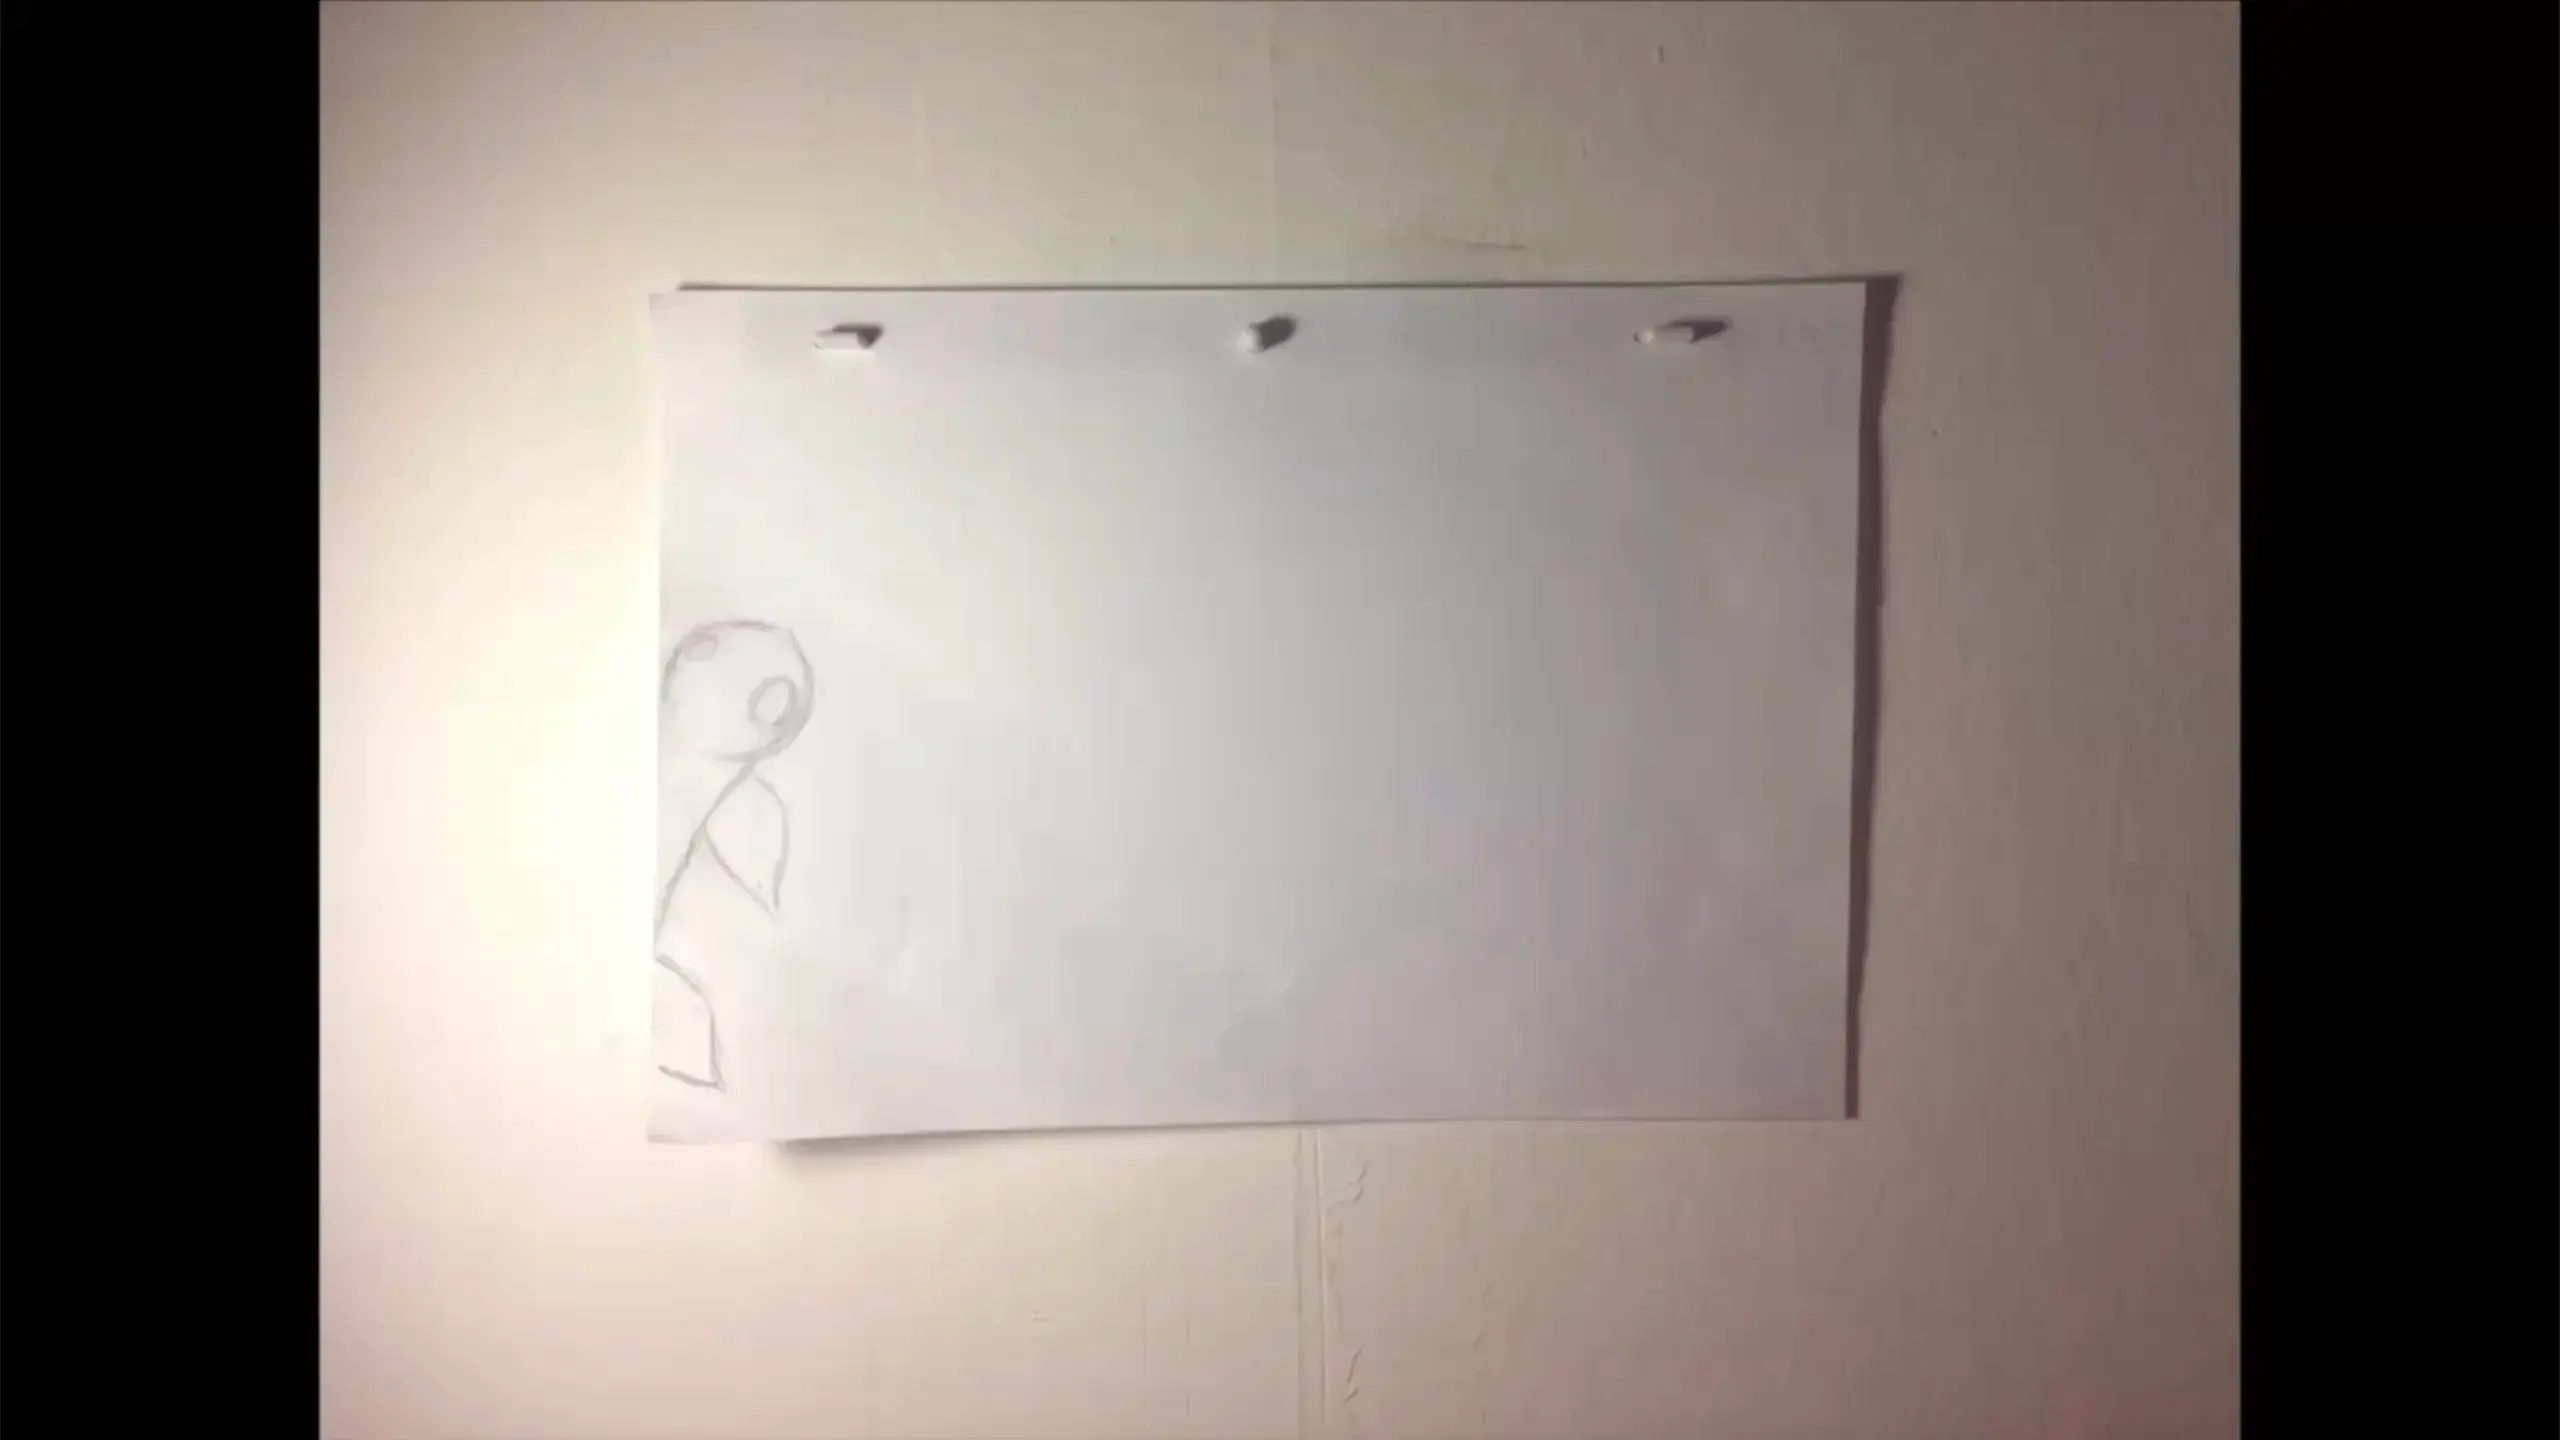 Sketches, Animation